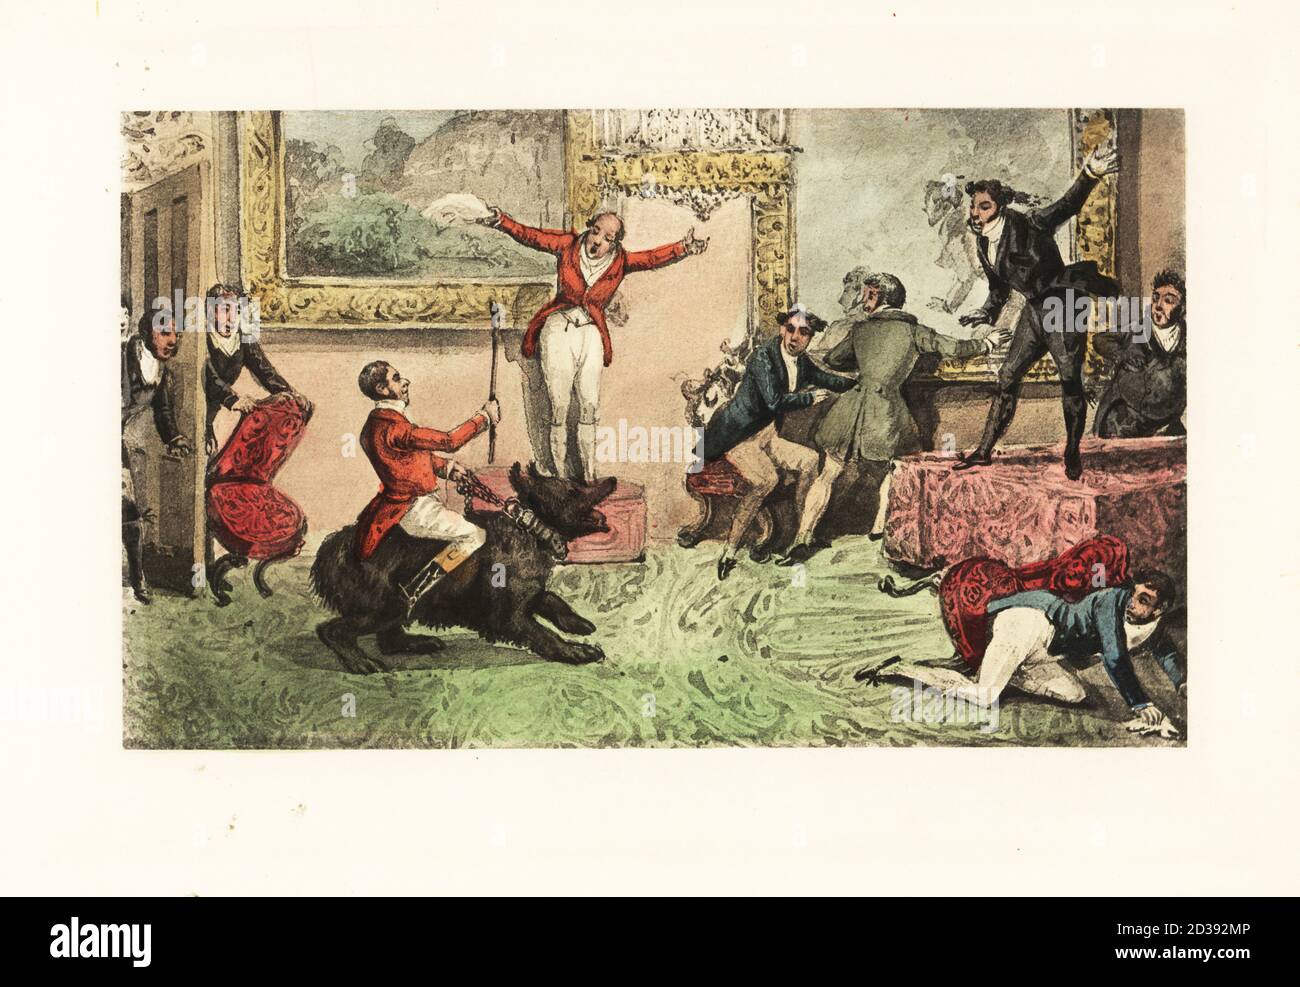 Drunken English gentleman rides a bear into a drawing room. Other guests jump on furniture to escape. Tally ho! Tally ho! A new hunter, first then, Tally ho! Chromolithographic facsimile of an illustration by Henry Thomas Alken from Memoirs of the Life of the Late John Mytton by Nimrod aka Charles James Apperley, Kegan Paul, London, 1900. Stock Photo